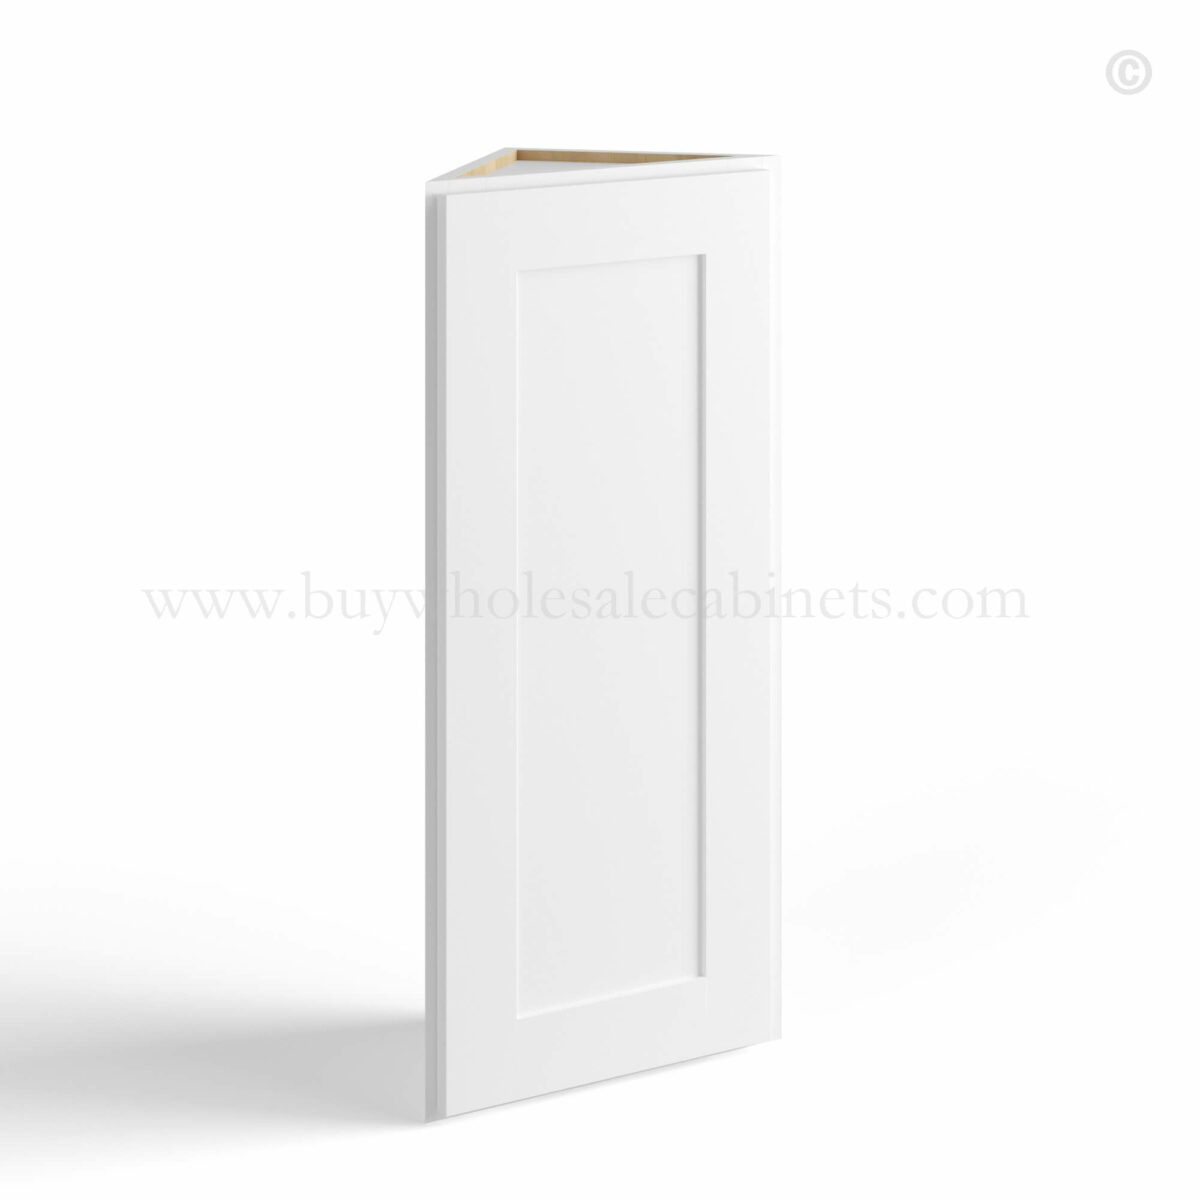 White Shaker 12 Angle Wall Cabinet